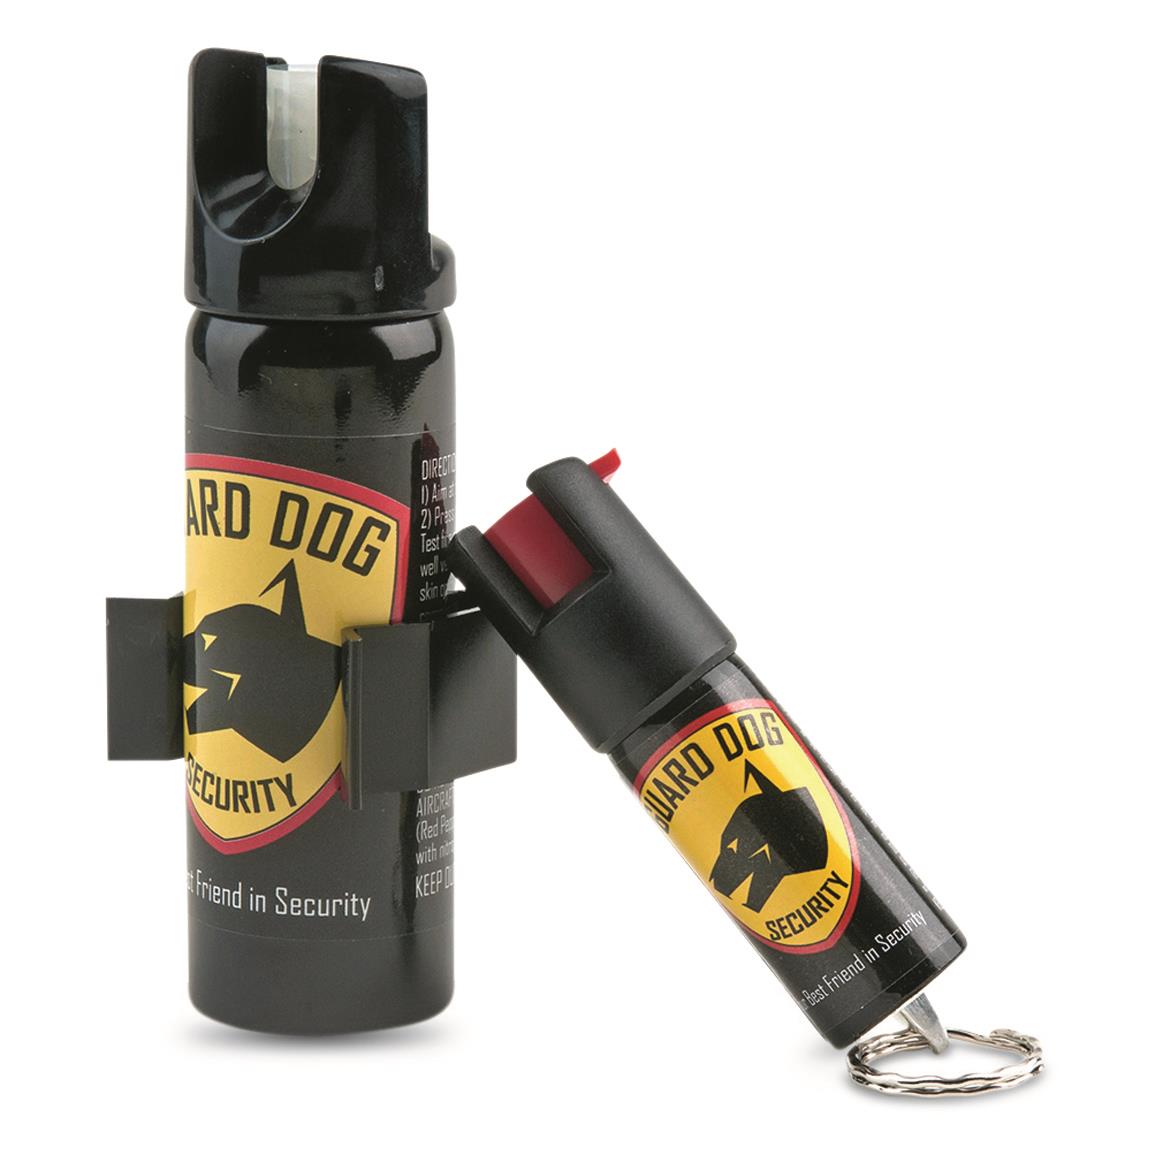 Guard Dog Home and Away Pepper Spray Kit